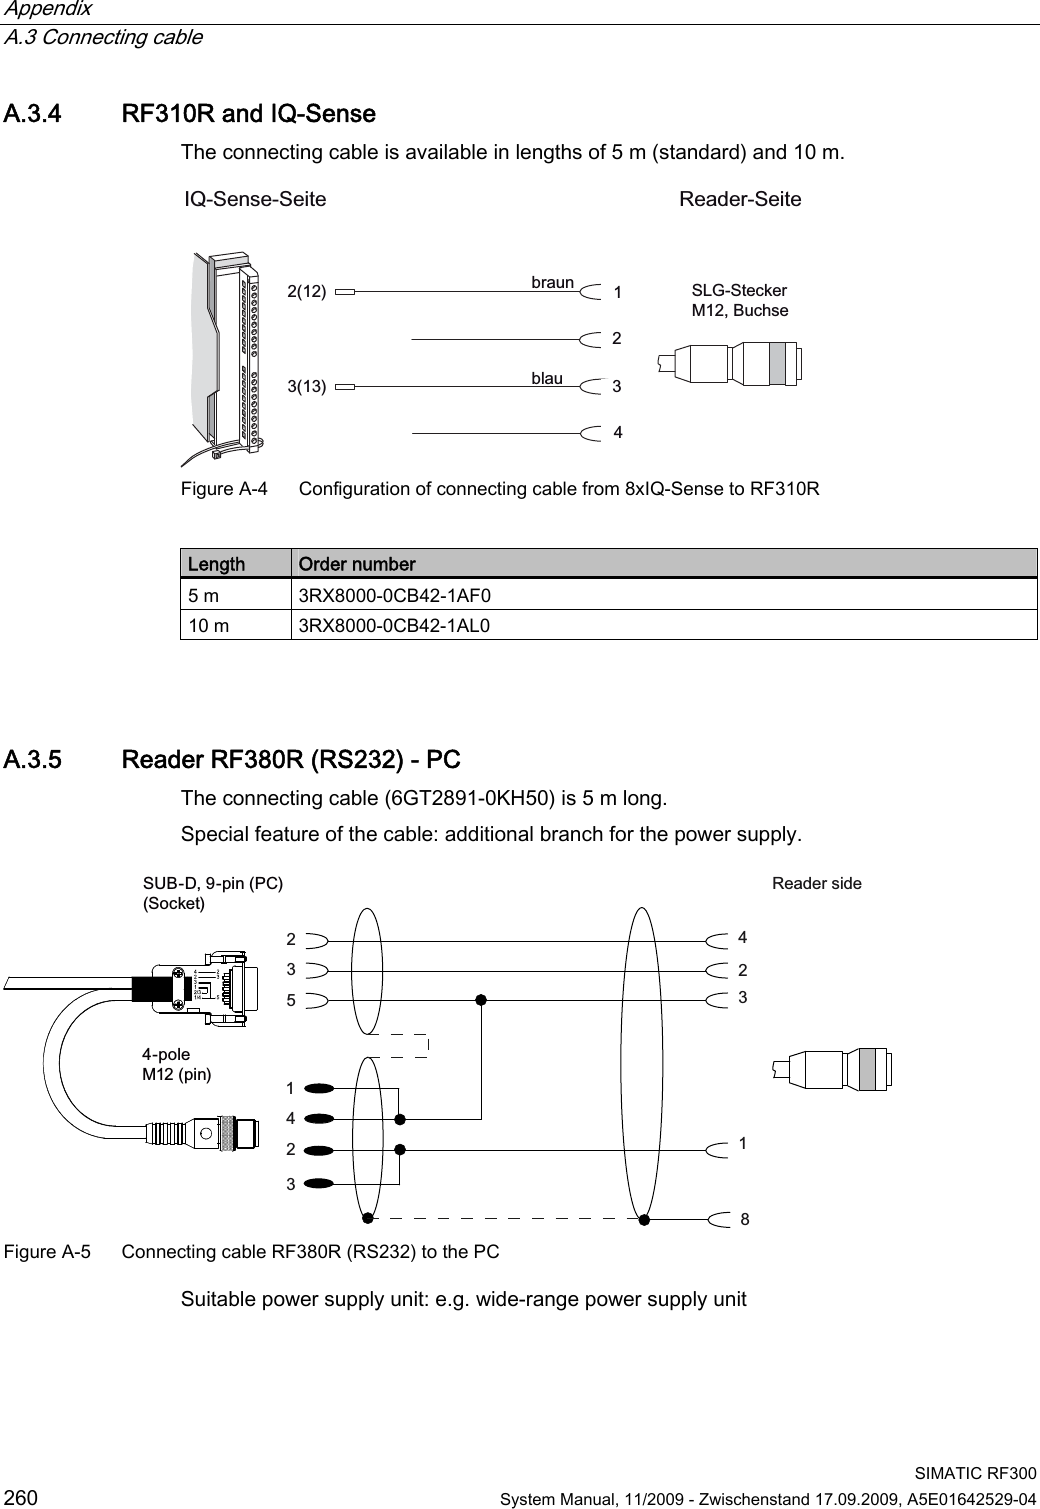 Appendix   A.3 Connecting cable  SIMATIC RF300 260  System Manual, 11/2009 - Zwischenstand 17.09.2009, A5E01642529-04 A.3.4 RF310R and IQ-Sense The connecting cable is available in lengths of 5 m (standard) and 10 m. 6/*6WHFNHU0%XFKVH5HDGHU6HLWH,46HQVH6HLWHEUDXQEODX Figure A-4  Configuration of connecting cable from 8xIQ-Sense to RF310R  Length  Order number 5 m  3RX8000-0CB42-1AF0 10 m  3RX8000-0CB42-1AL0  A.3.5 Reader RF380R (RS232) - PC The connecting cable (6GT2891-0KH50) is 5 m long.  Special feature of the cable: additional branch for the power supply. 5HDGHUVLGHSROH0SLQ68%&apos;SLQ3&amp;6RFNHW Figure A-5  Connecting cable RF380R (RS232) to the PC Suitable power supply unit: e.g. wide-range power supply unit  